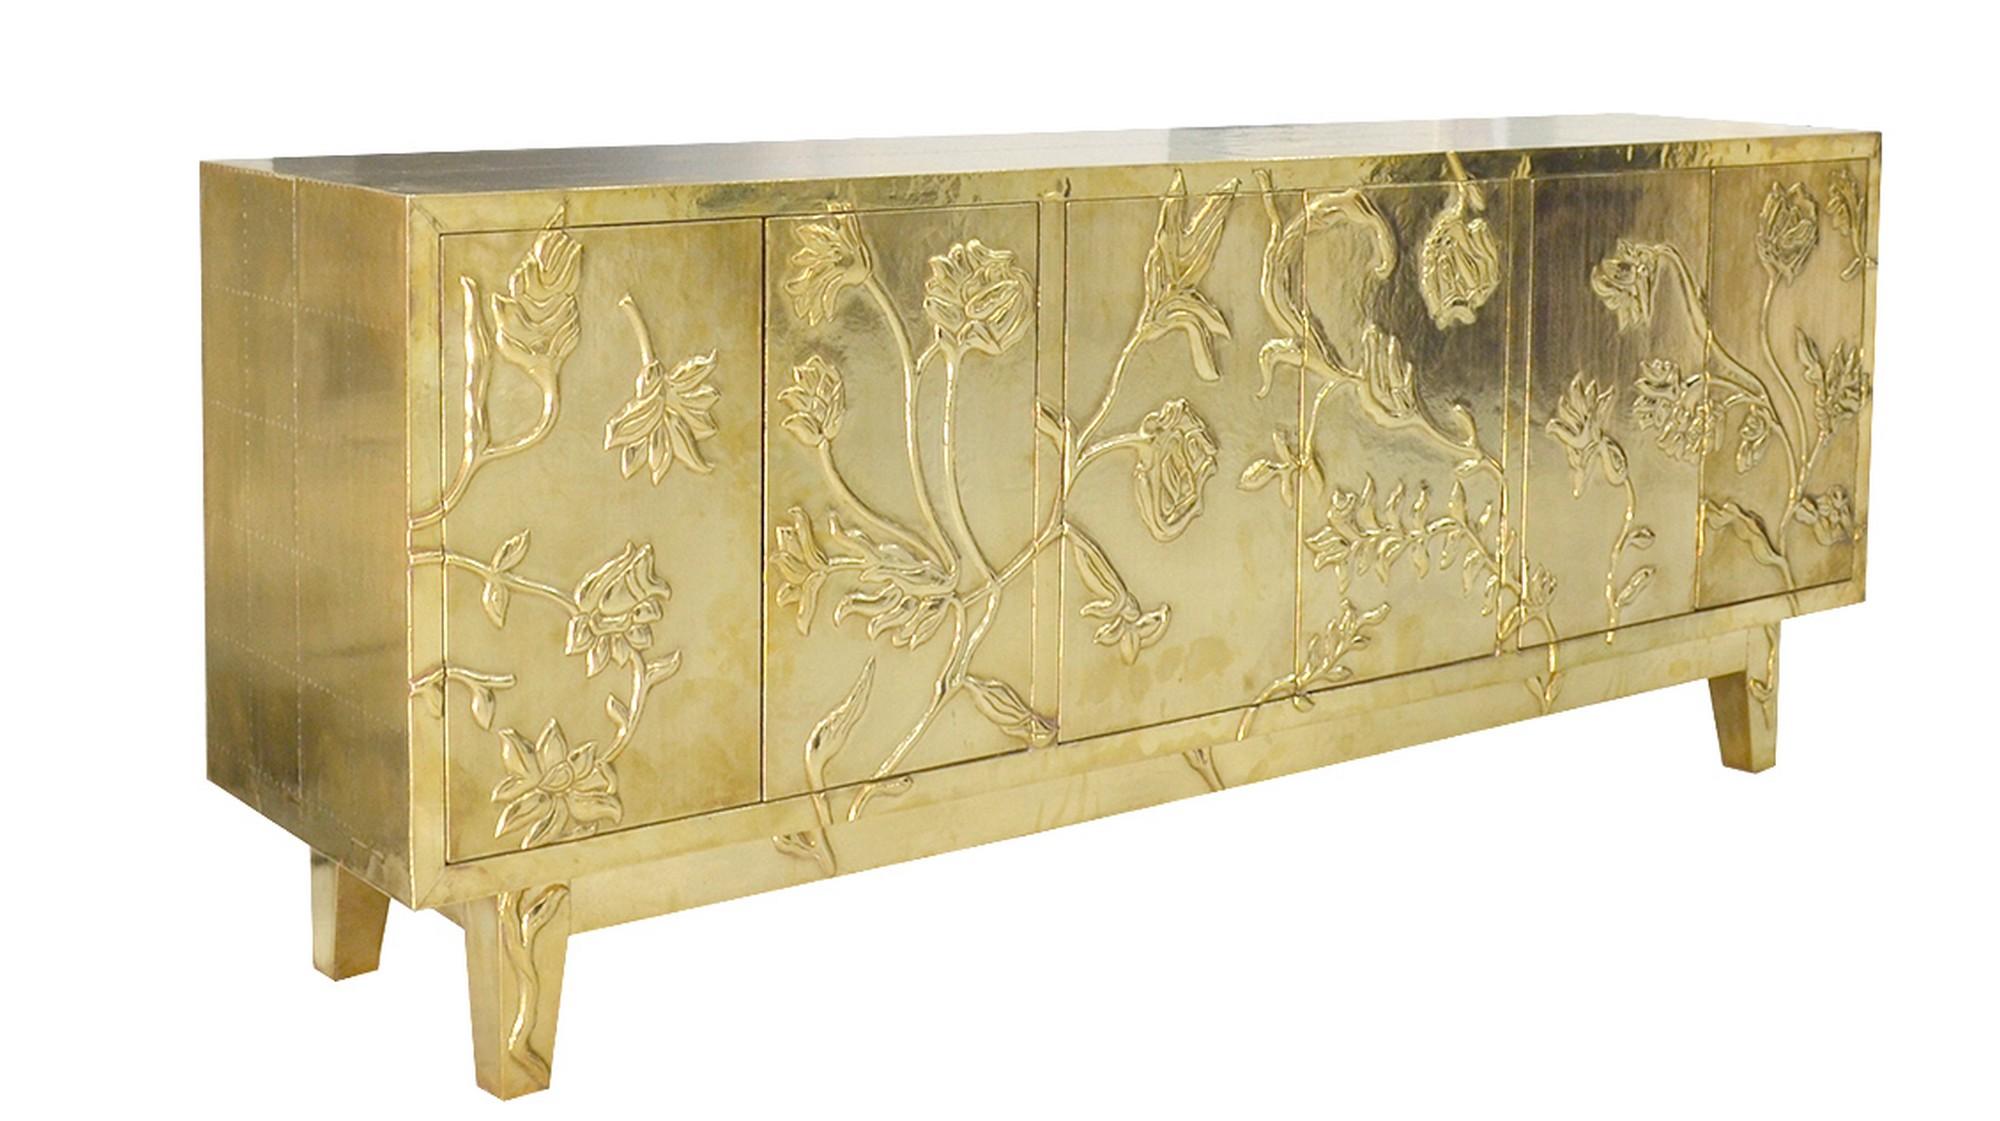 Modern Credenza Sideboard in Floral Brass Clad, Handmade in India by S. Odegard For Sale 1